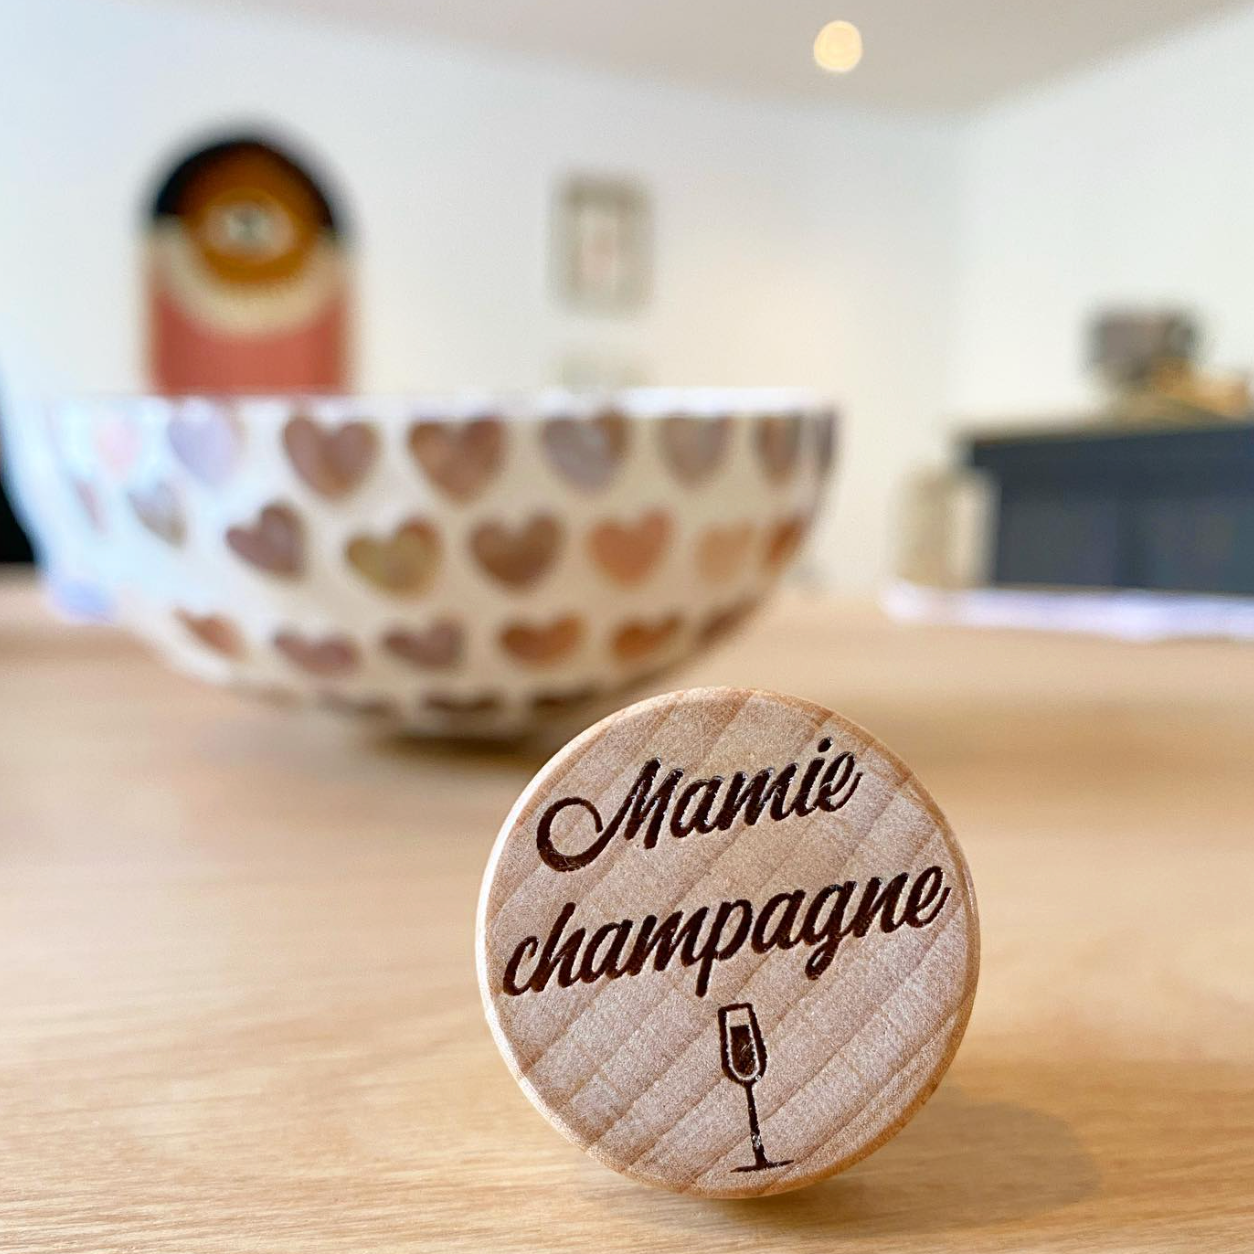 WINE STOPPER "MAMIE CHAMPAGNE"